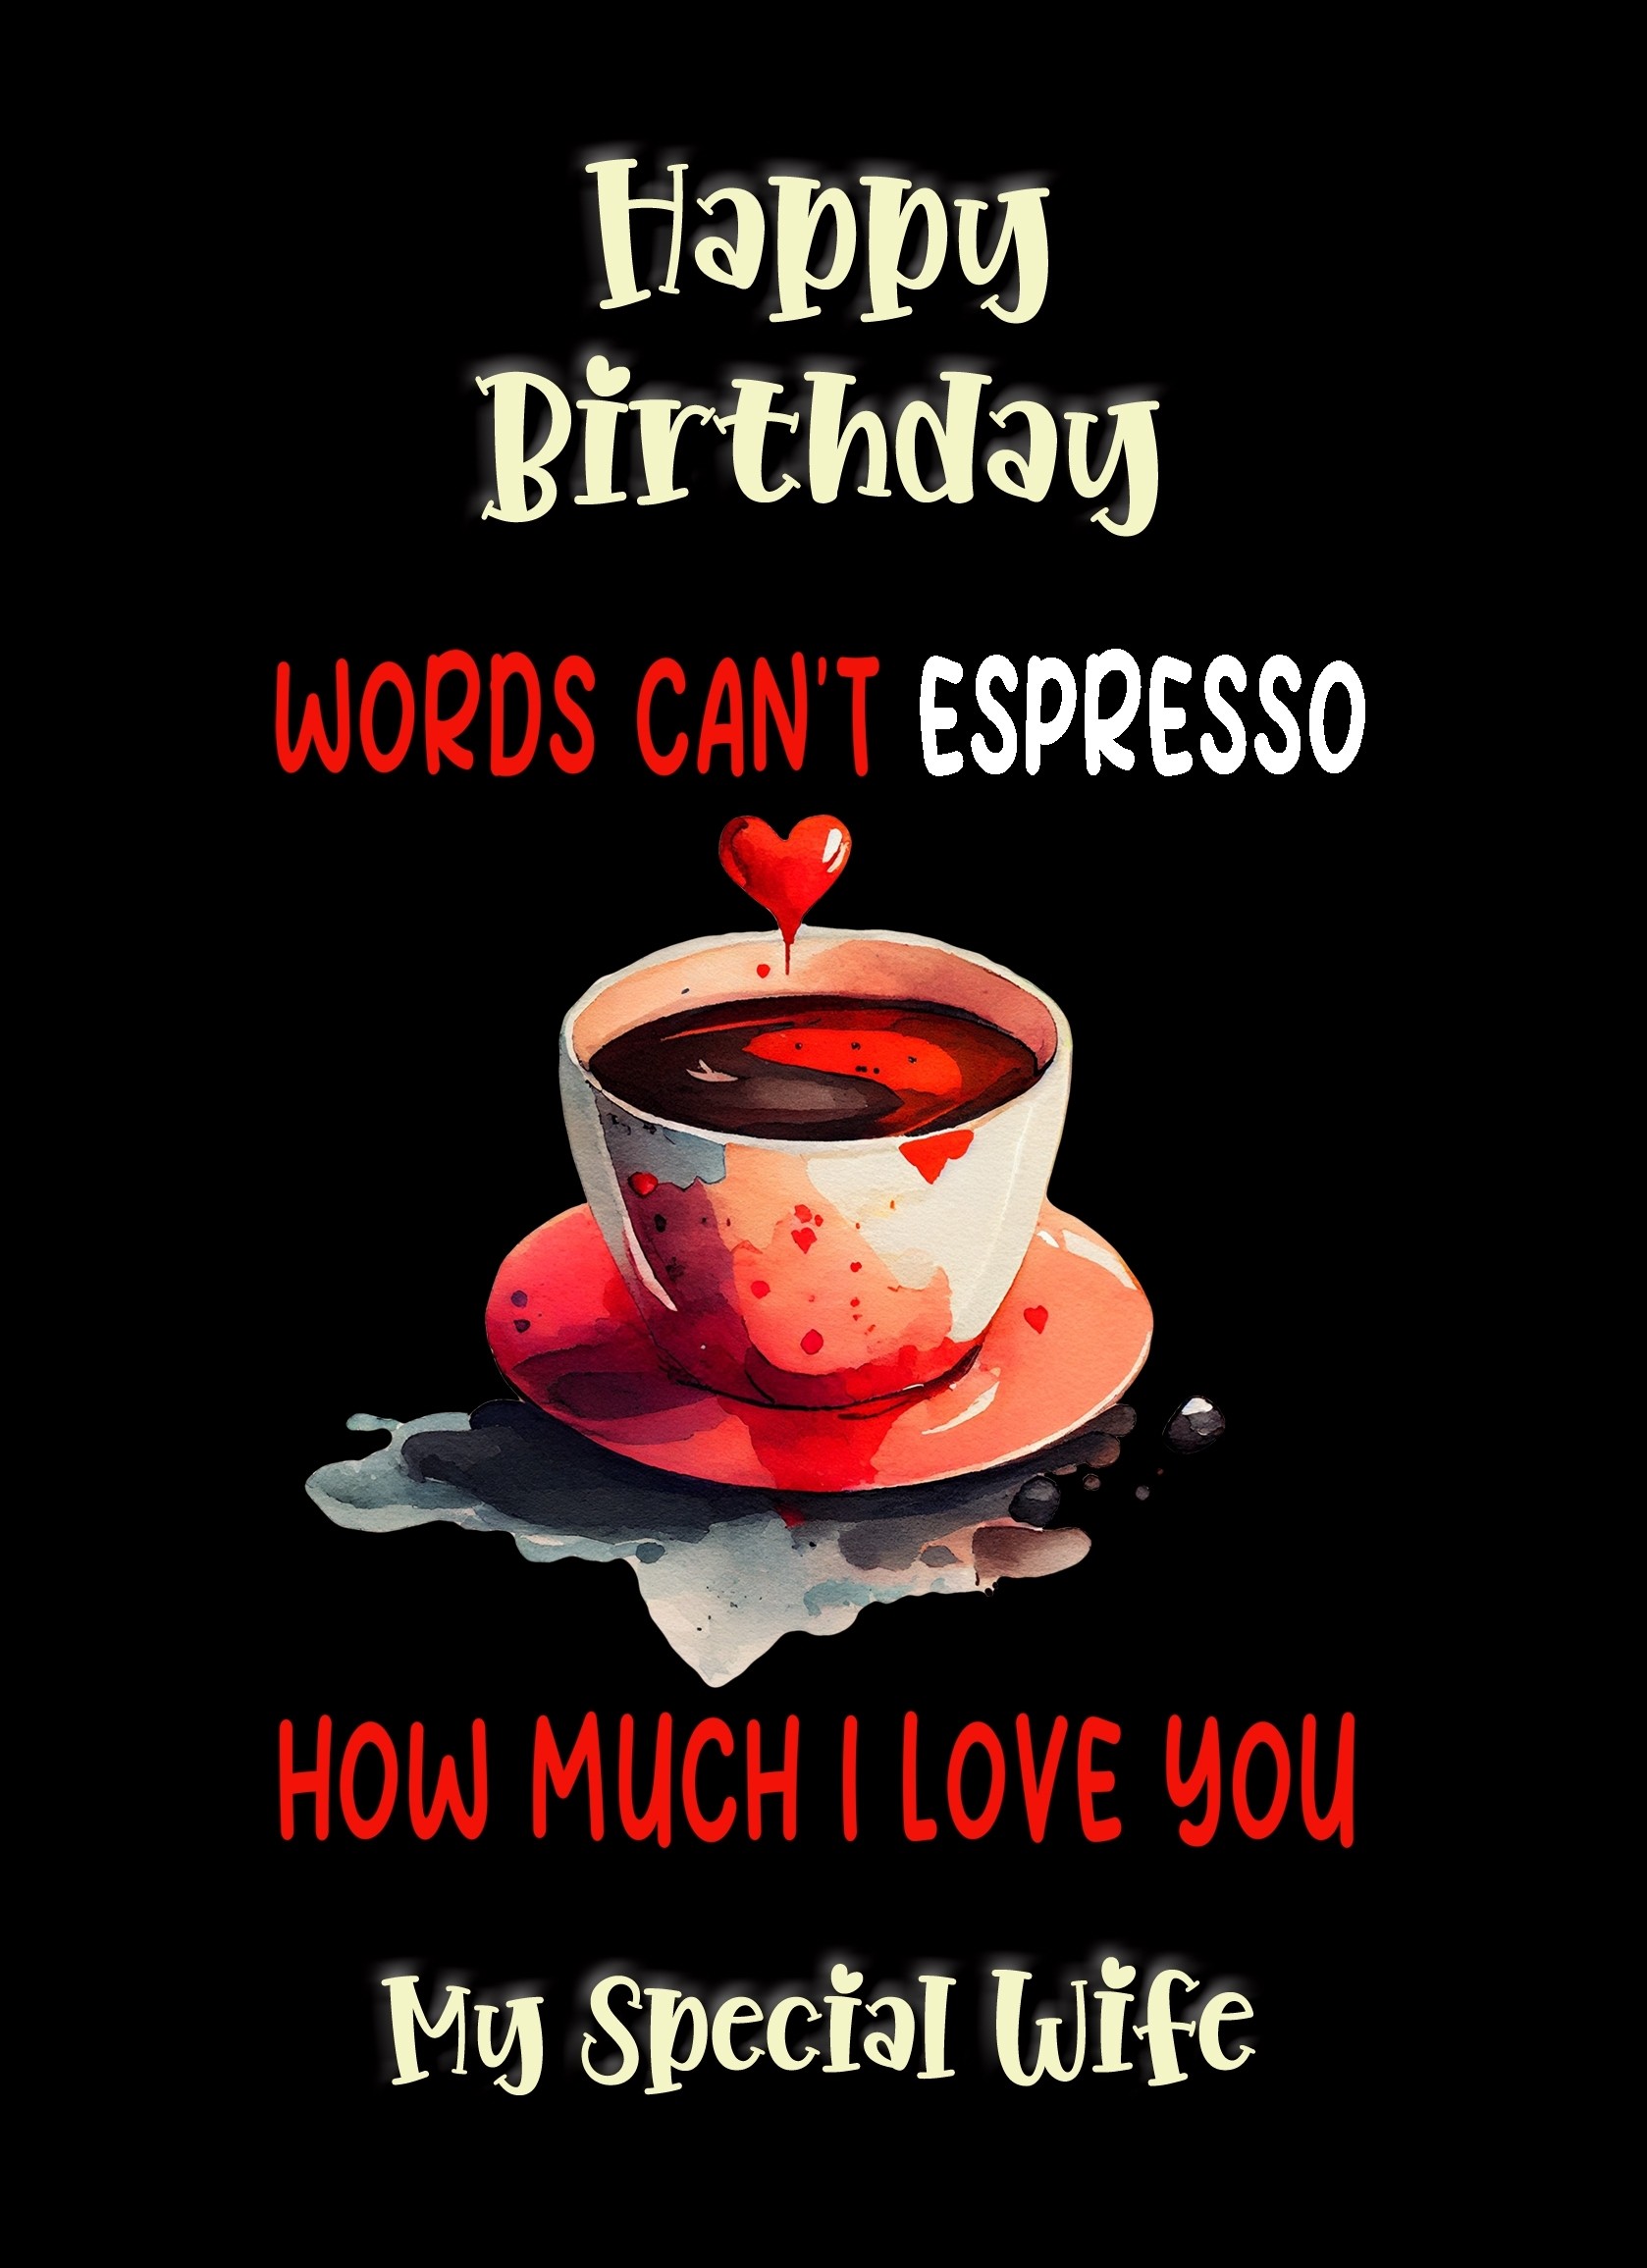 Funny Pun Romantic Birthday Card for Wife (Can't Espresso)